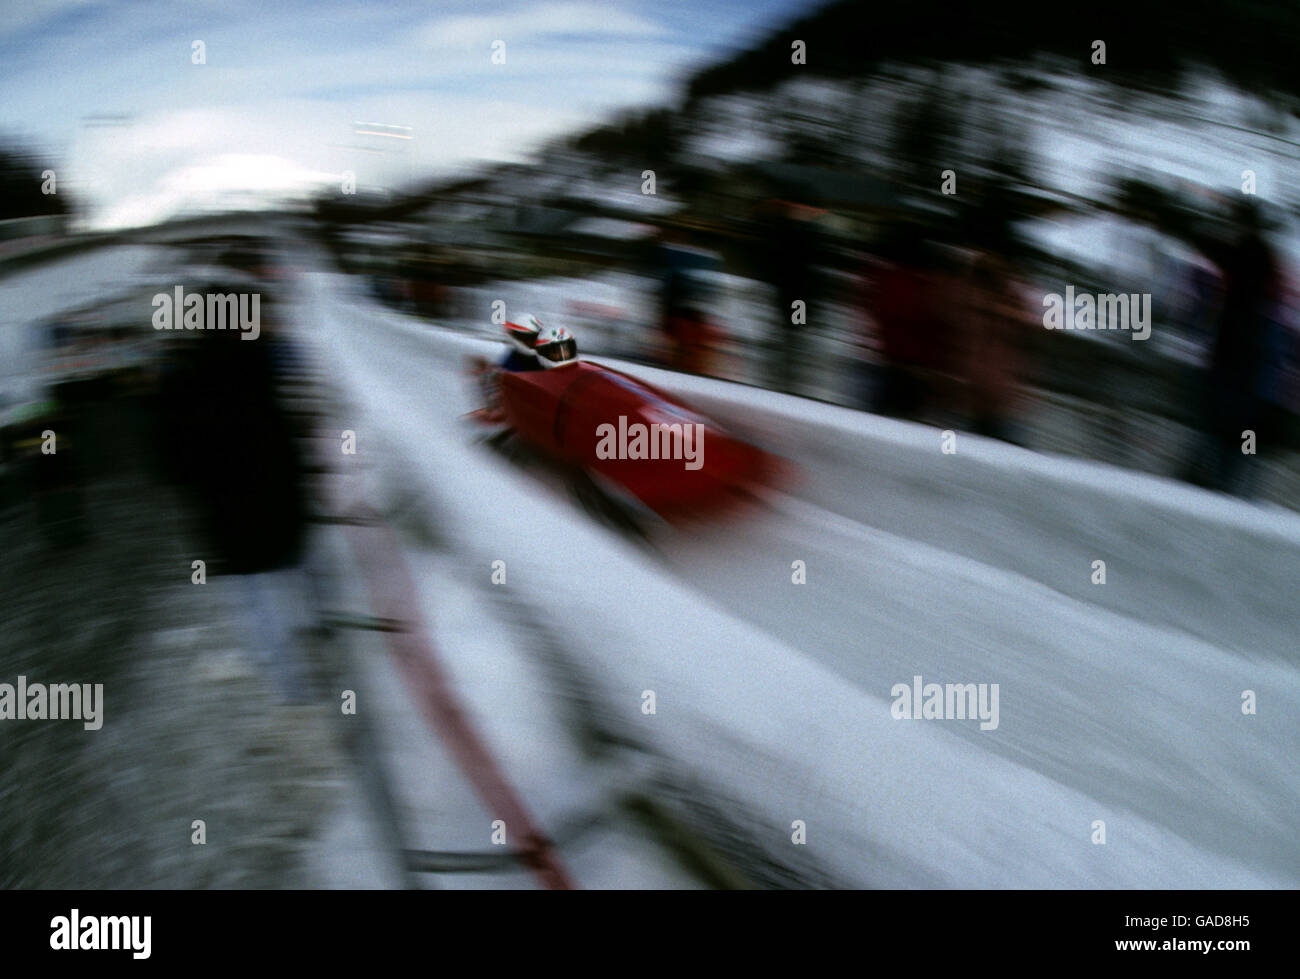 Winter Olympic Games 1992 - Albertville. General view of the Bobsleigh track from the games. Stock Photo